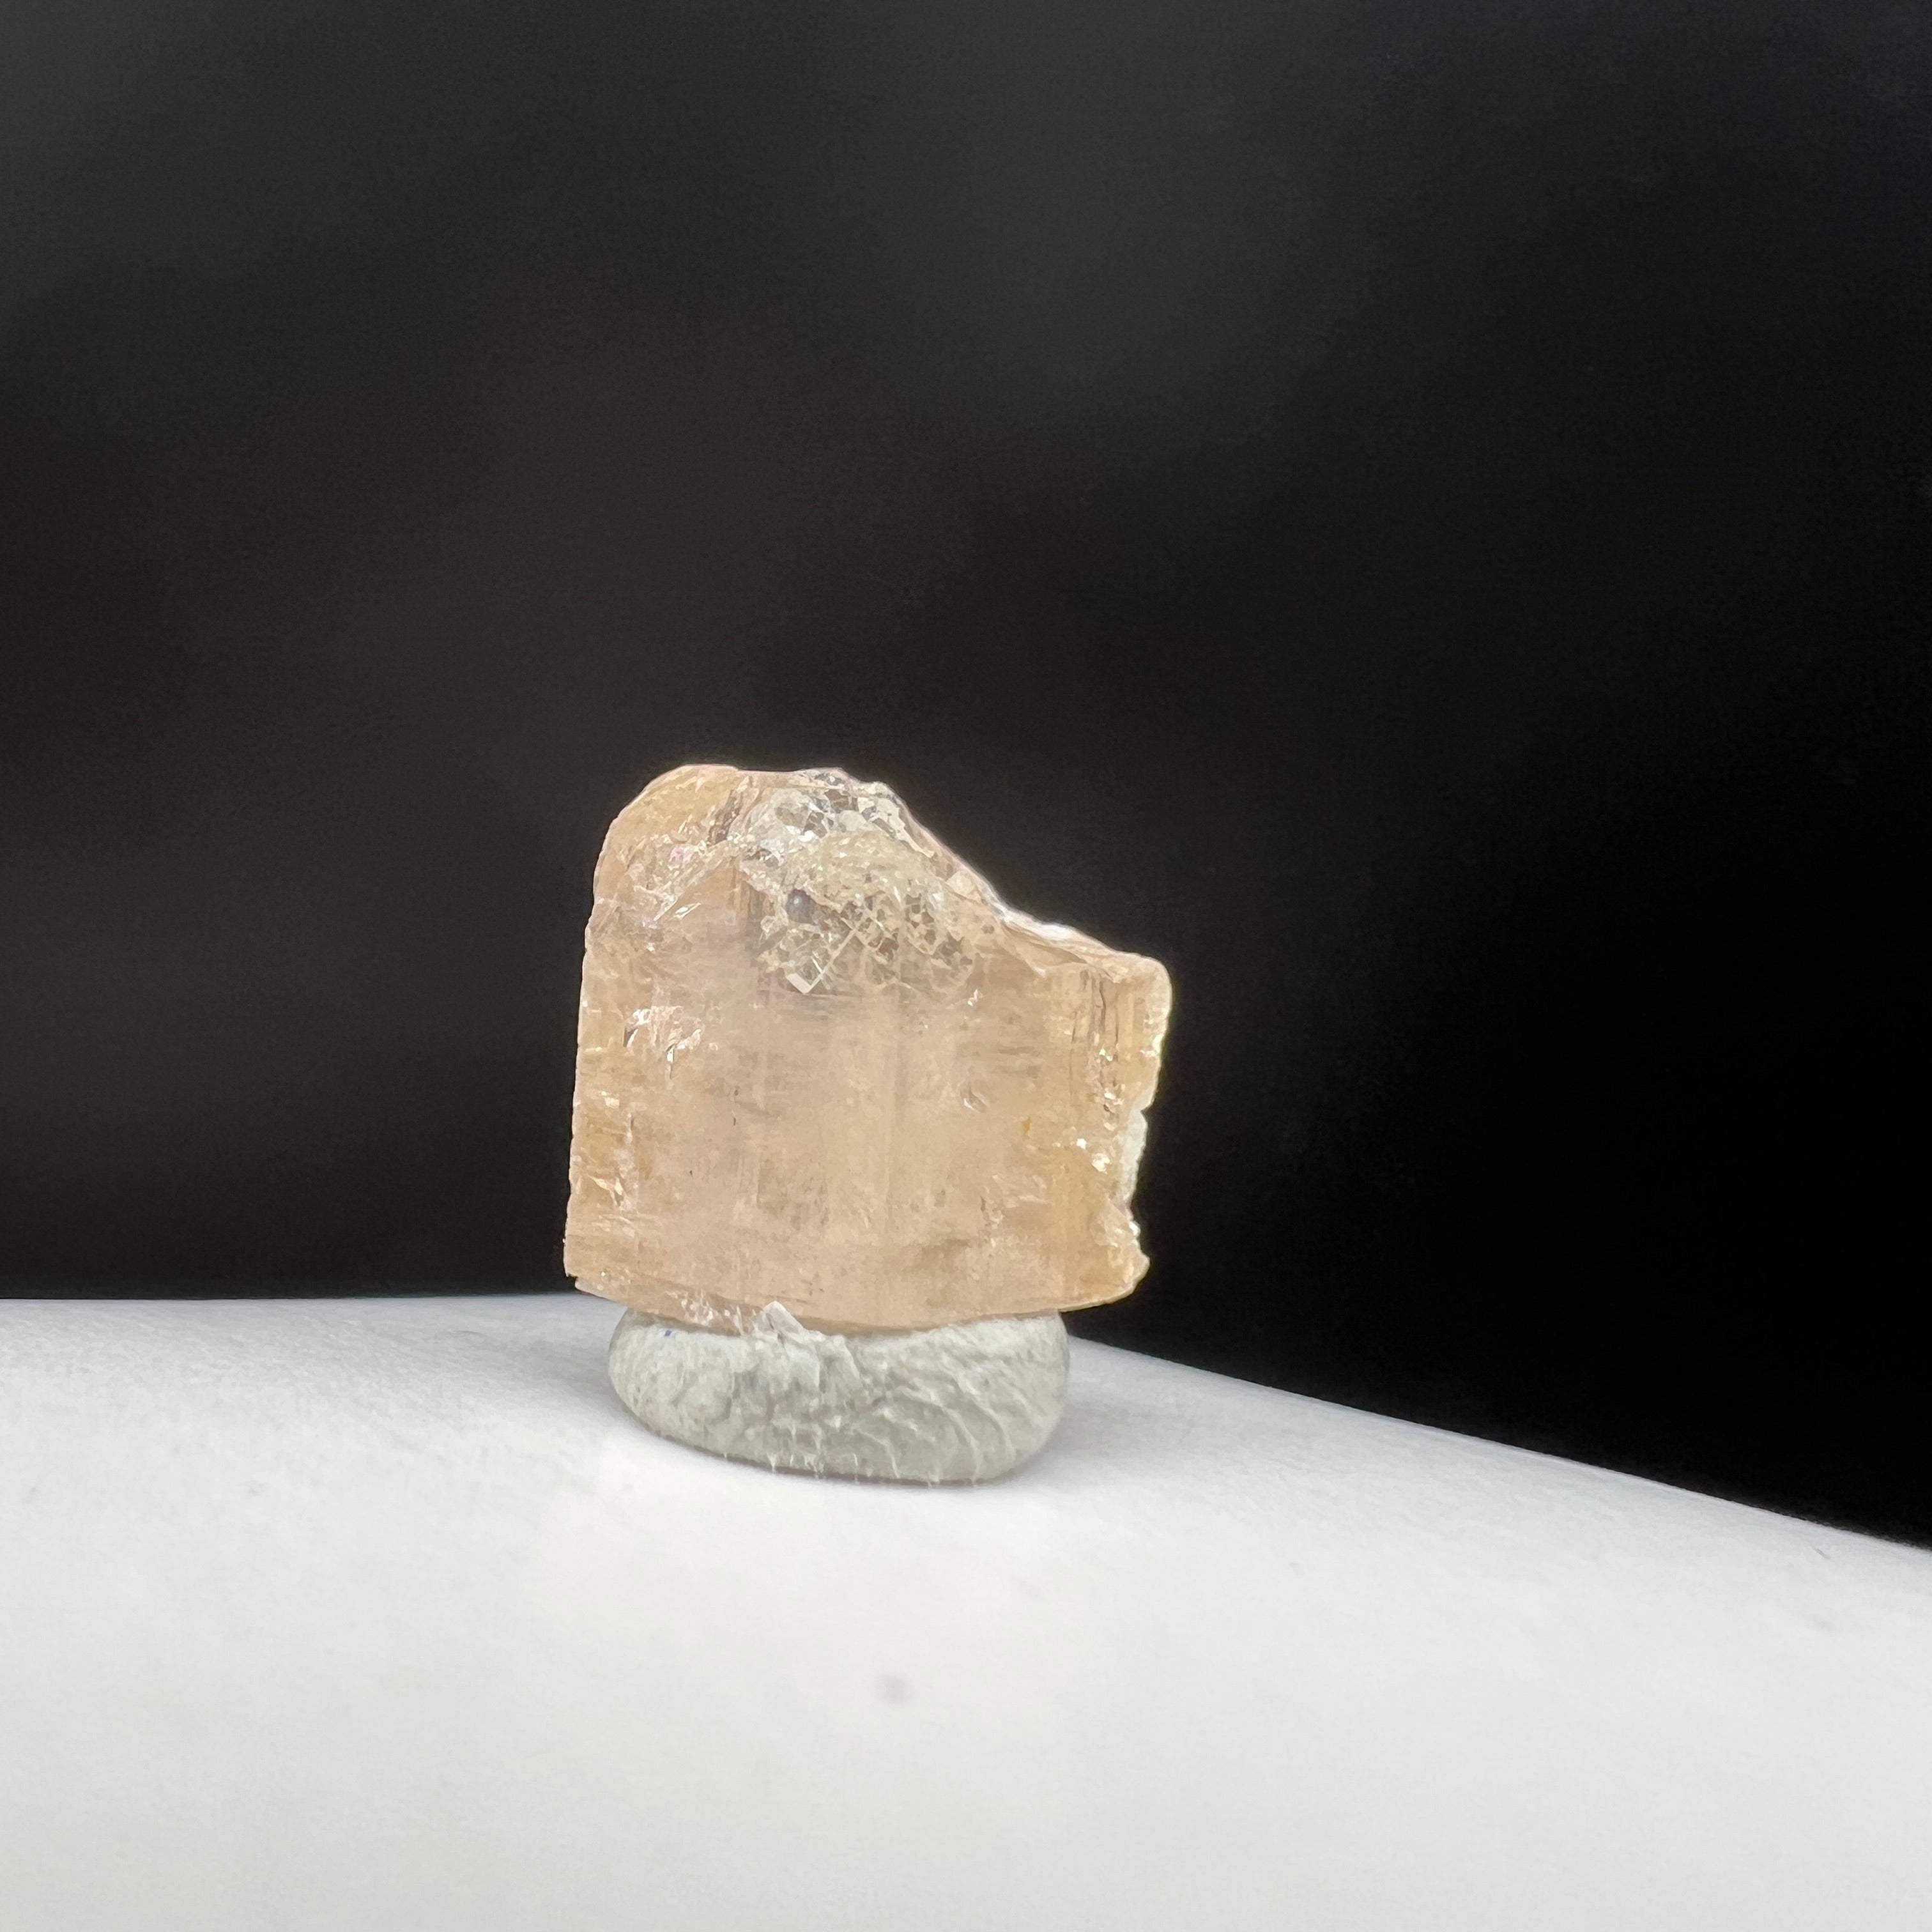 Imperial Topaz Non-Terminated Crystal - 010